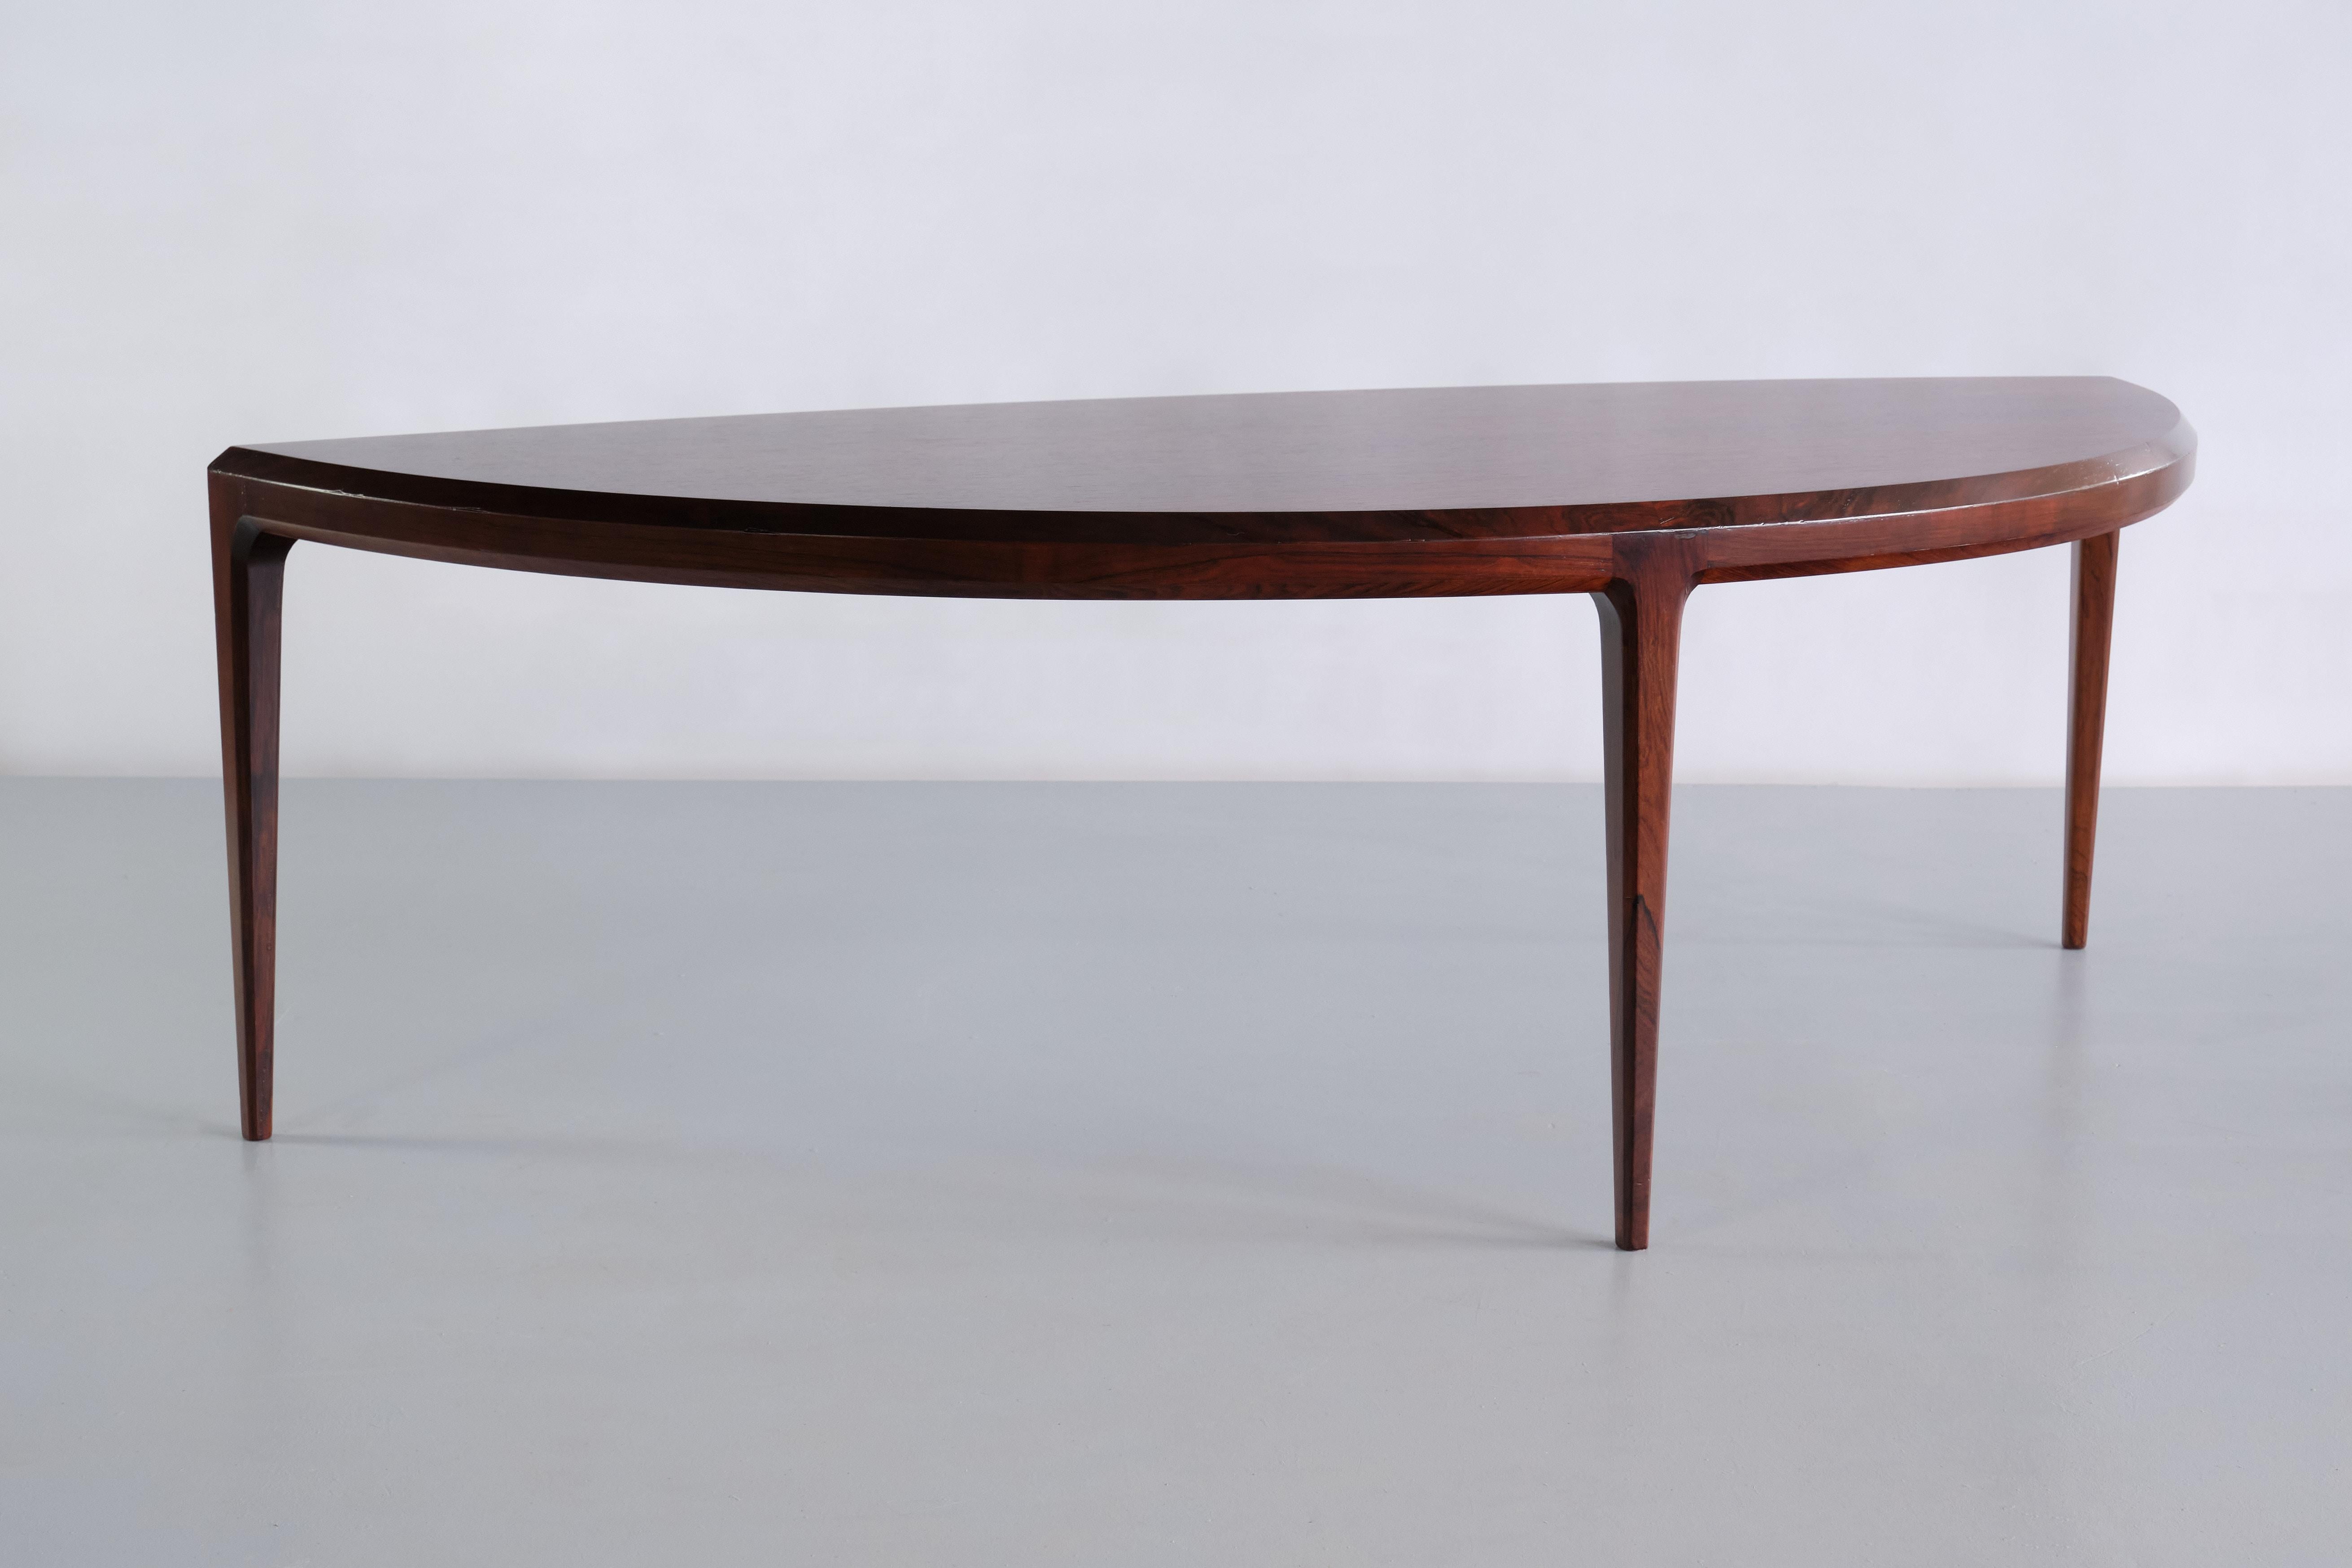 This striking coffee table was designed by Johannes Andersen and manufactured by CFC Silkeborg in Denmark in the early 1960s. The organic, demilune shaped top and the three slim, tapered legs make this a very elegant and modern design. The table is